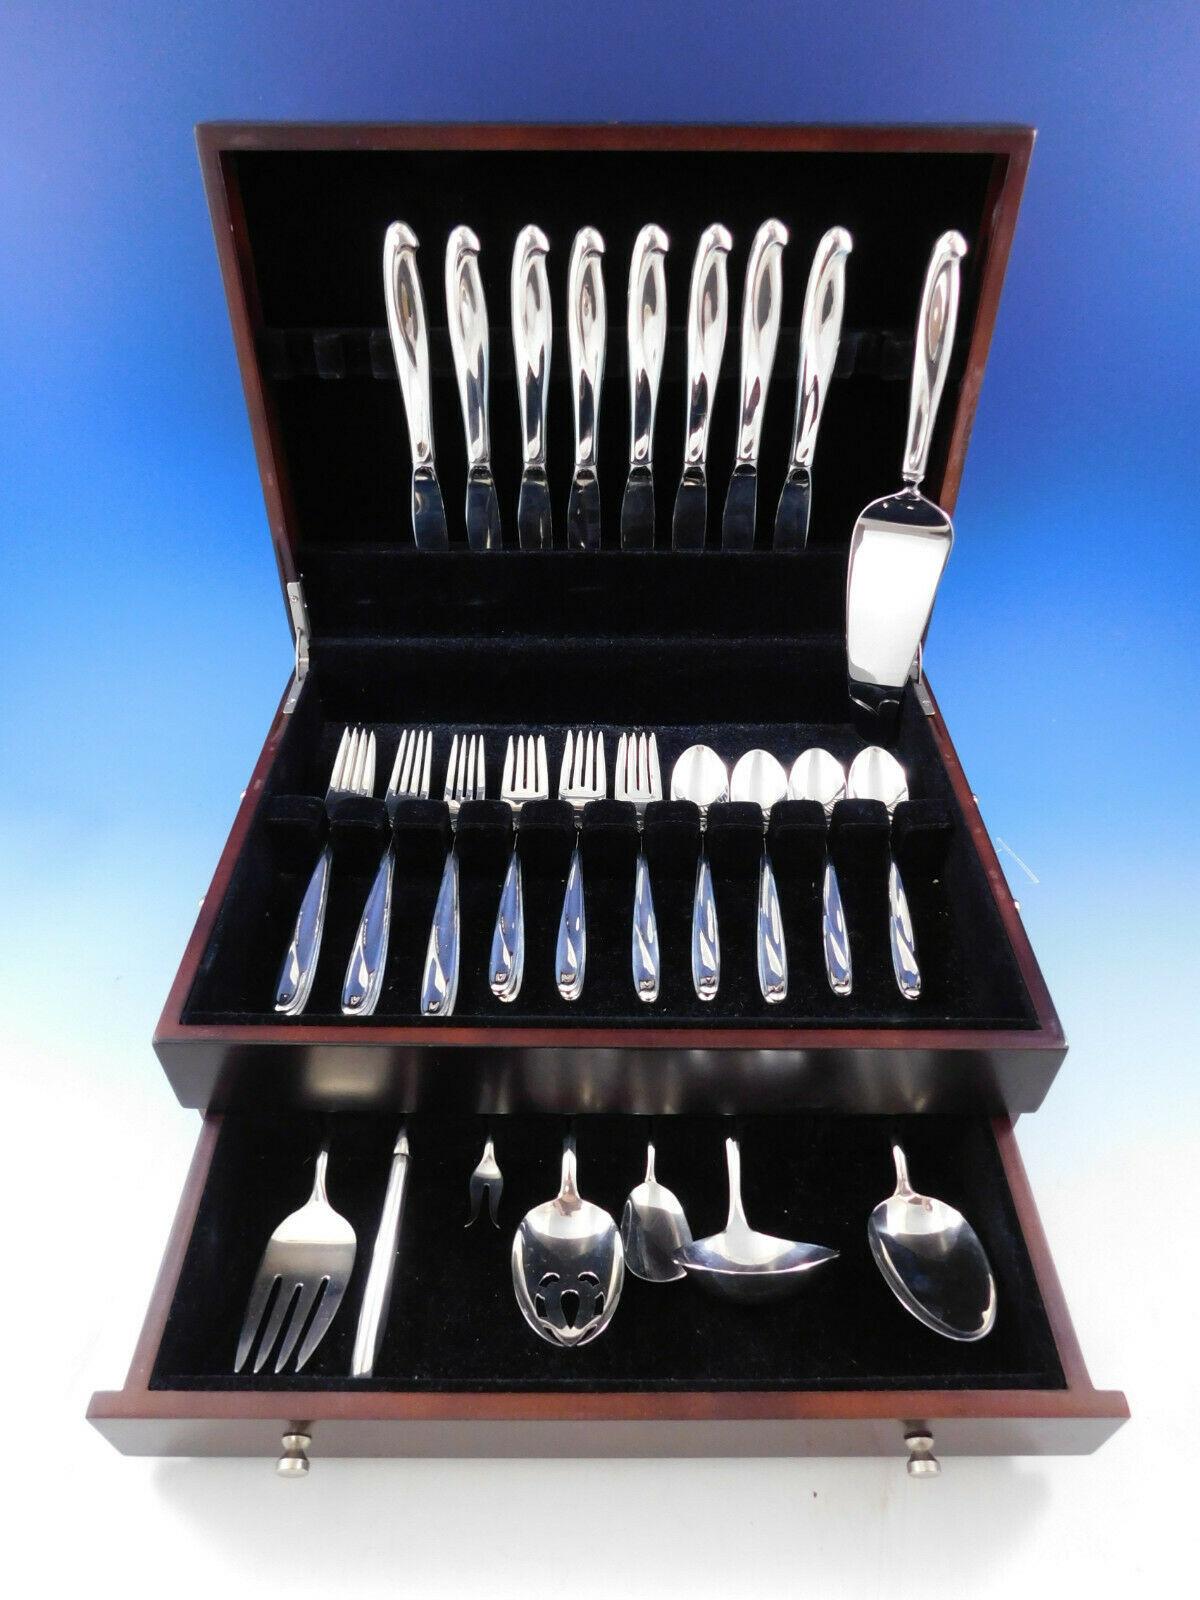 Silver Sculpture by Reed and Barton sterling silver Flatware set, 40 pieces. (See photo of Reed & Barton's 1954 advertisement, as illustrated in Modernism in American Silver by Stern book.) This set includes:

8 knives, 9